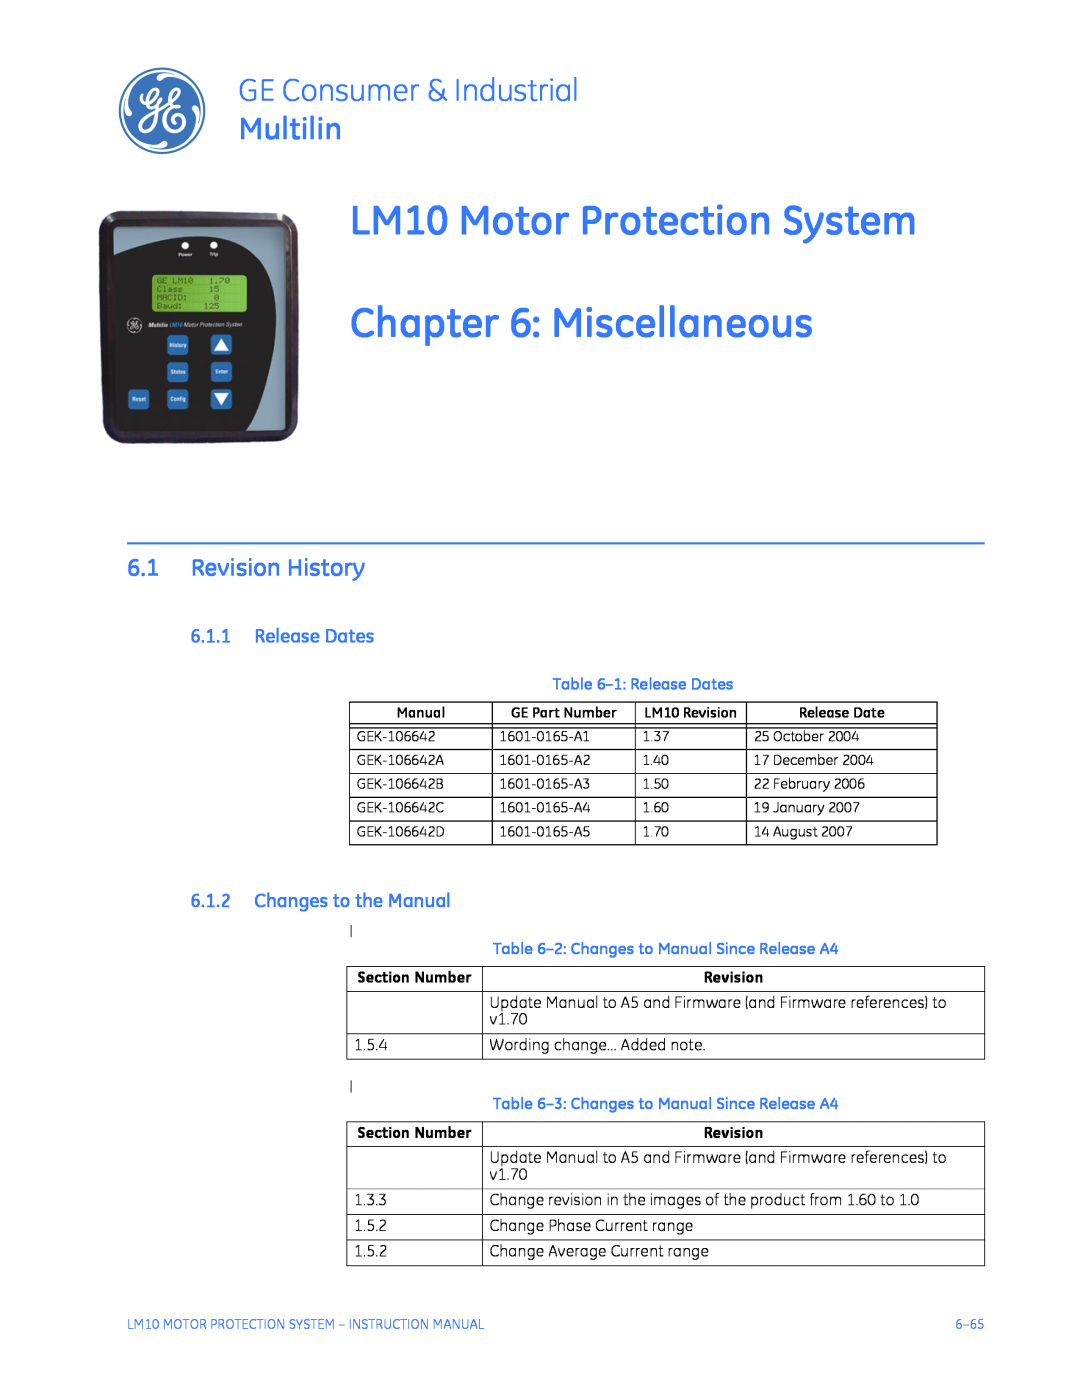 GE LM10 Motor Protection System Miscellaneous, Revision History, Release Dates, Changes to the Manual, Multilin 